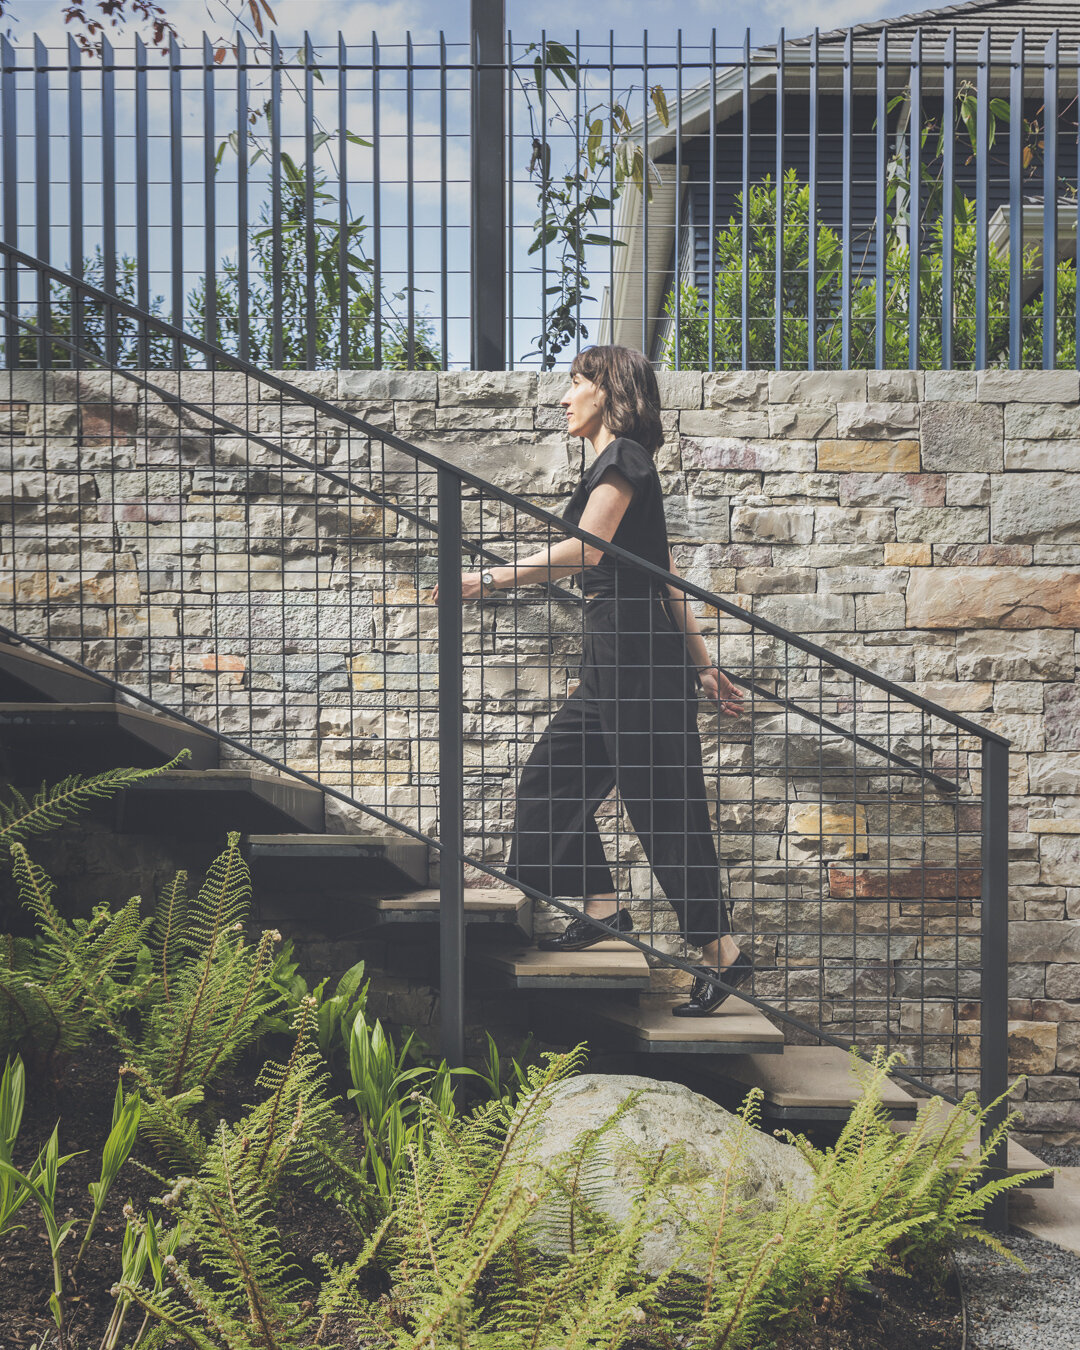 Our talented colleague and friend @randiwags modelling our custom trapezoidal aluminum floating steps in the sunken garden of this project. The steps are anchored to the wall and the treads are finished with a stone slab to match the rest of the ston